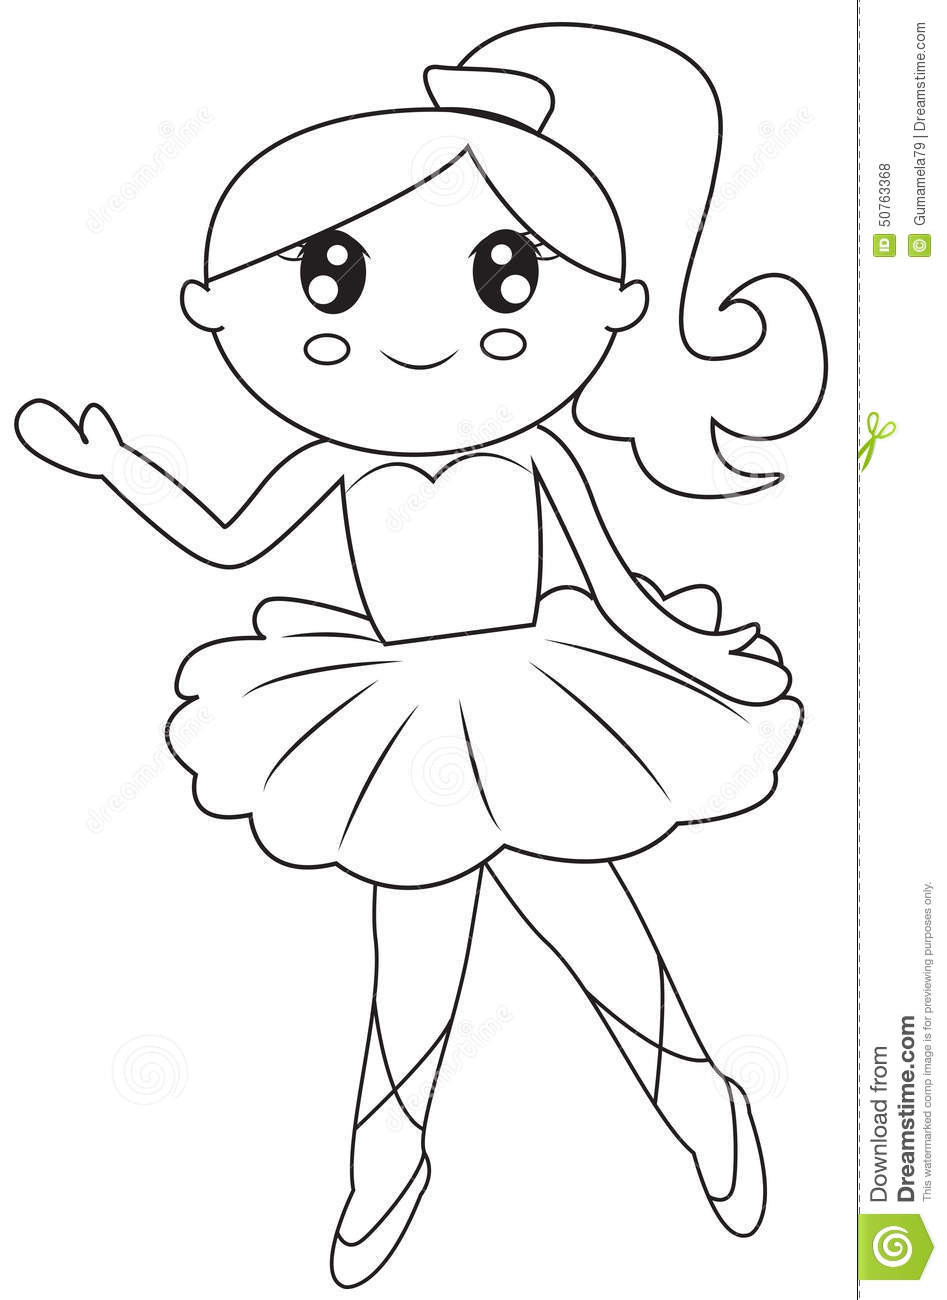 Ballerina Coloring Pages For Girls
 Drawn ballet child Pencil and in color drawn ballet child